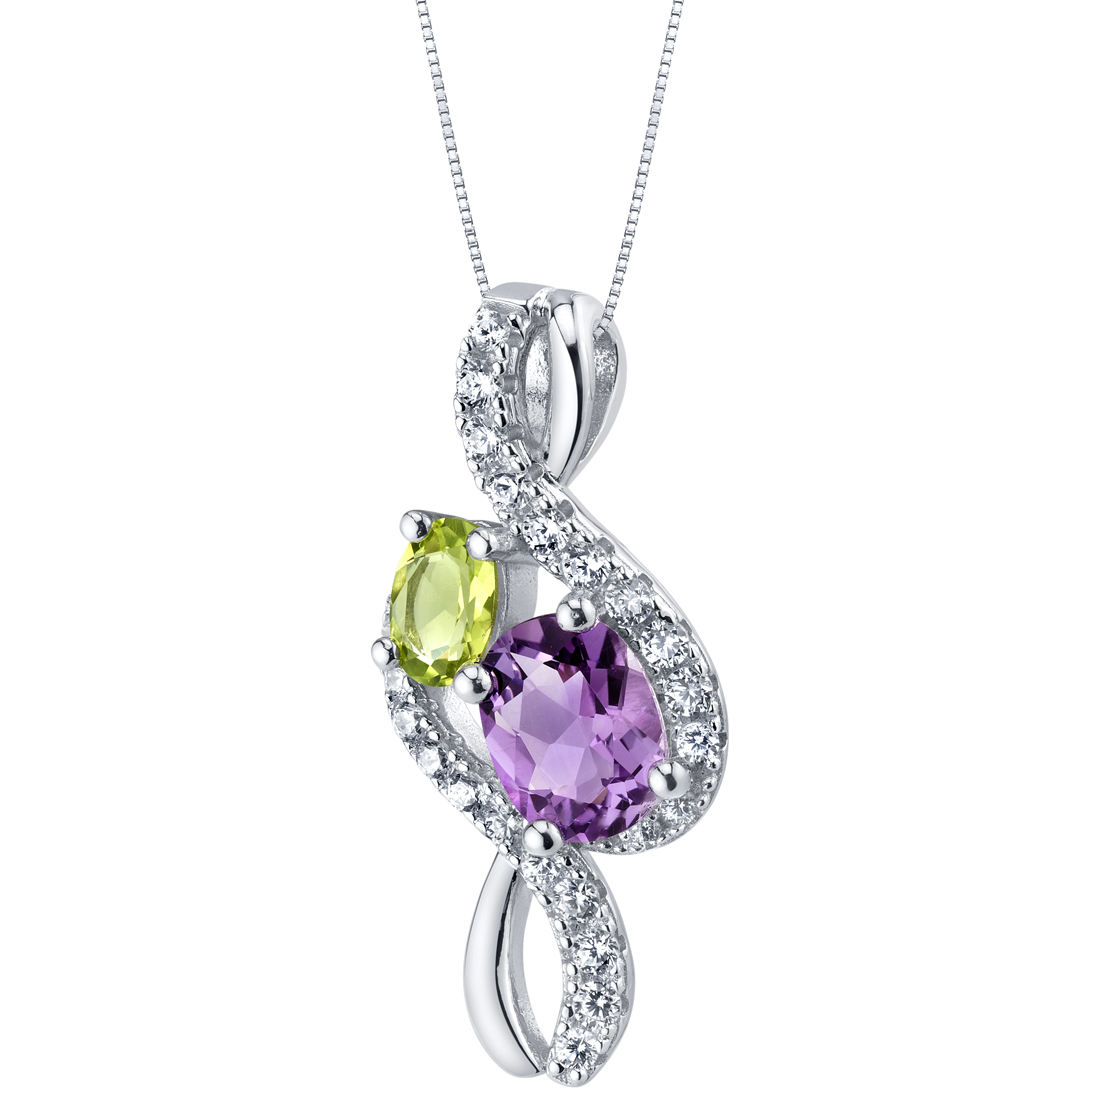 Amethyst and Peridot Sterling Silver Chorus Pendant Necklace | eBay